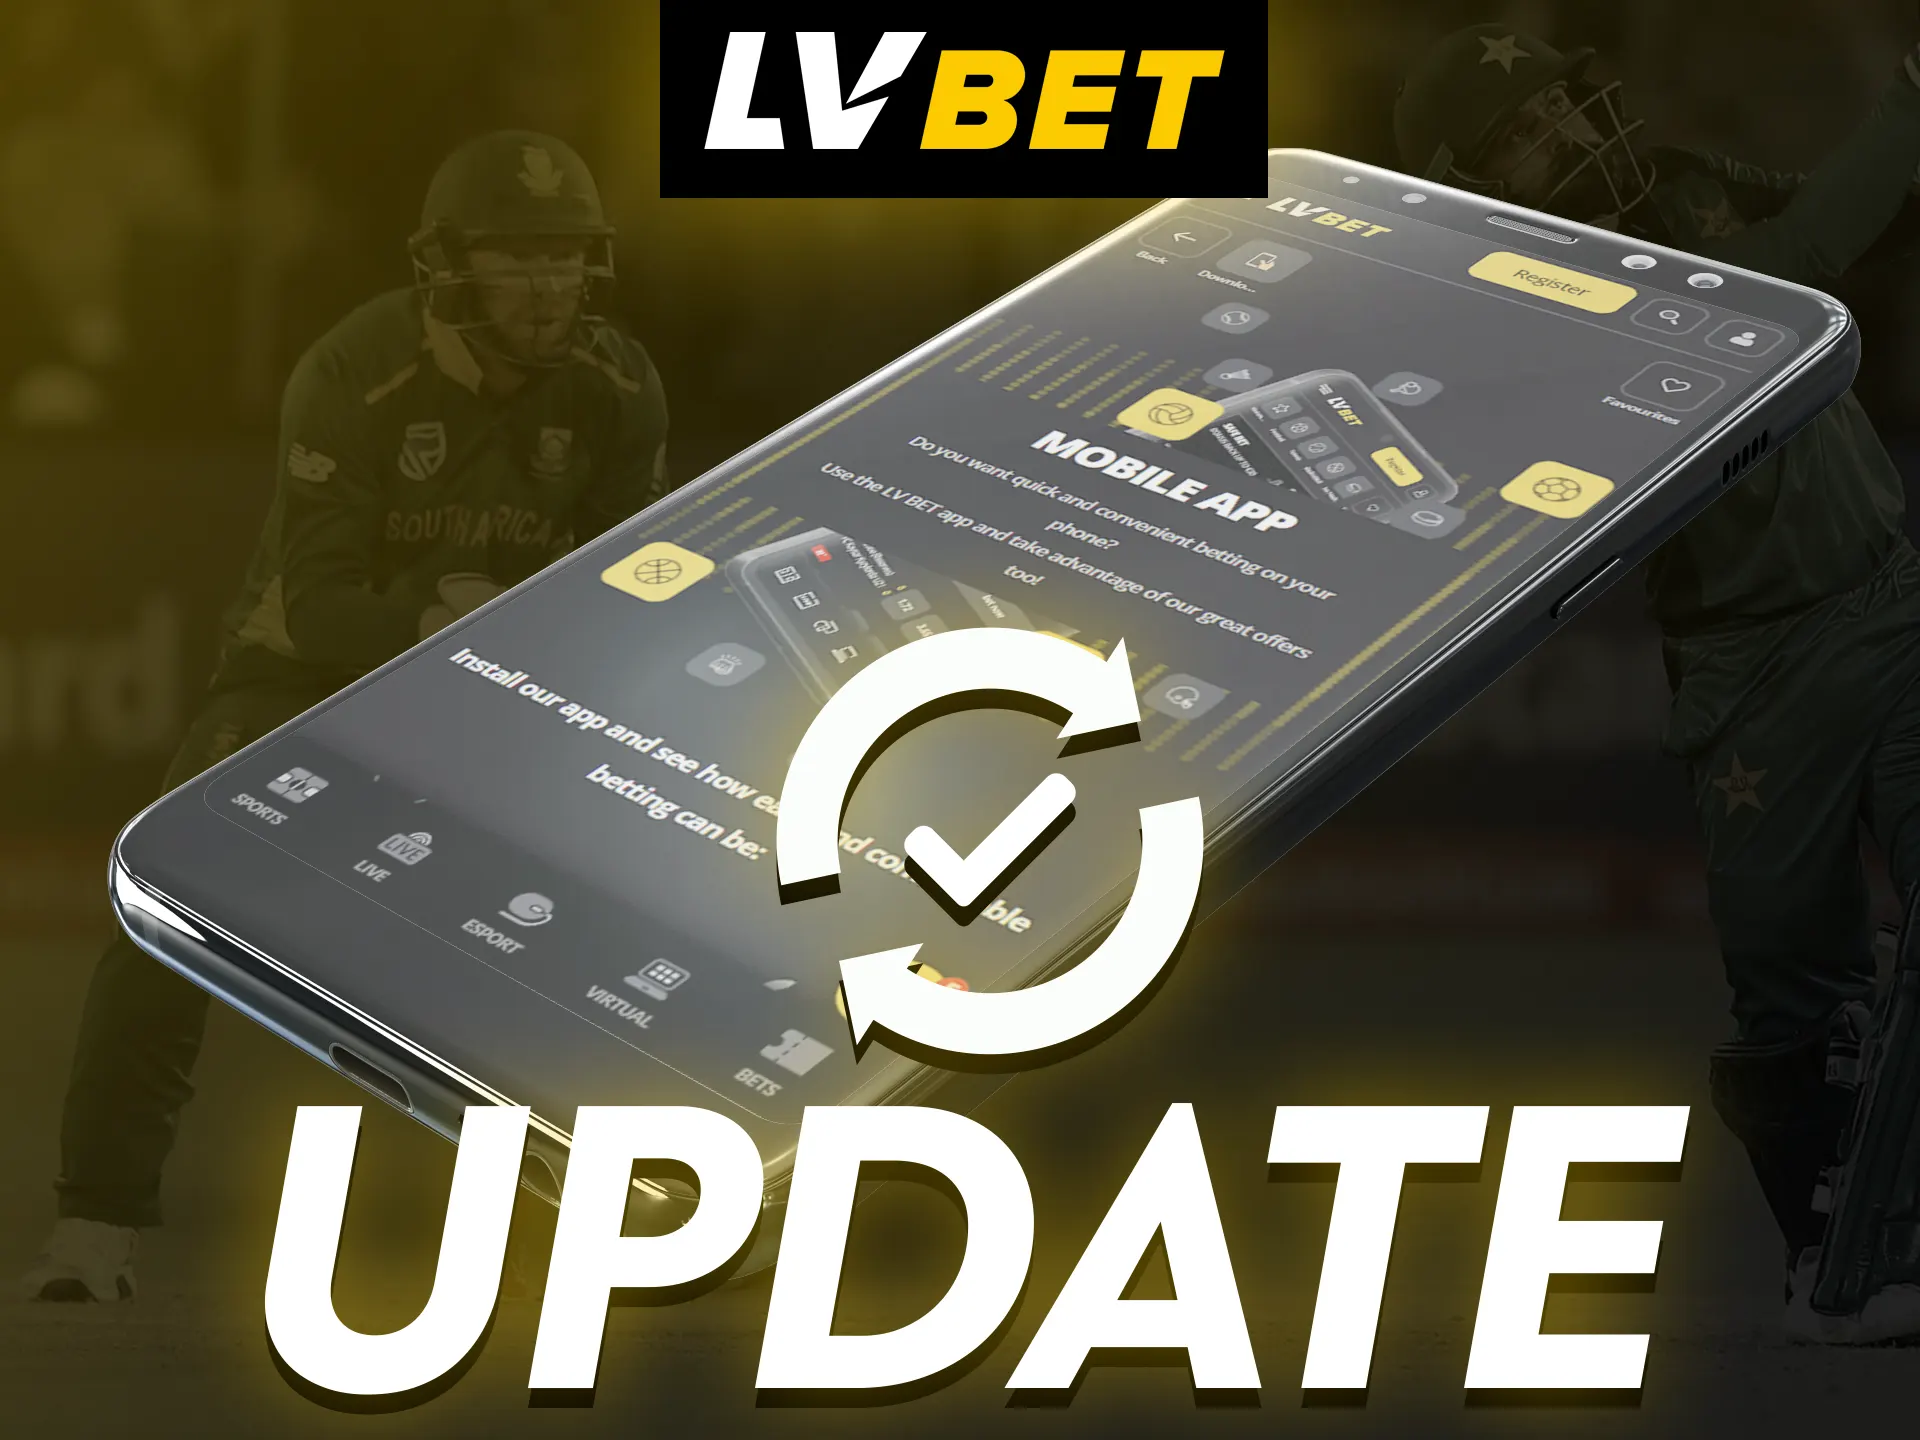 Be sure to update your LV Bet app.